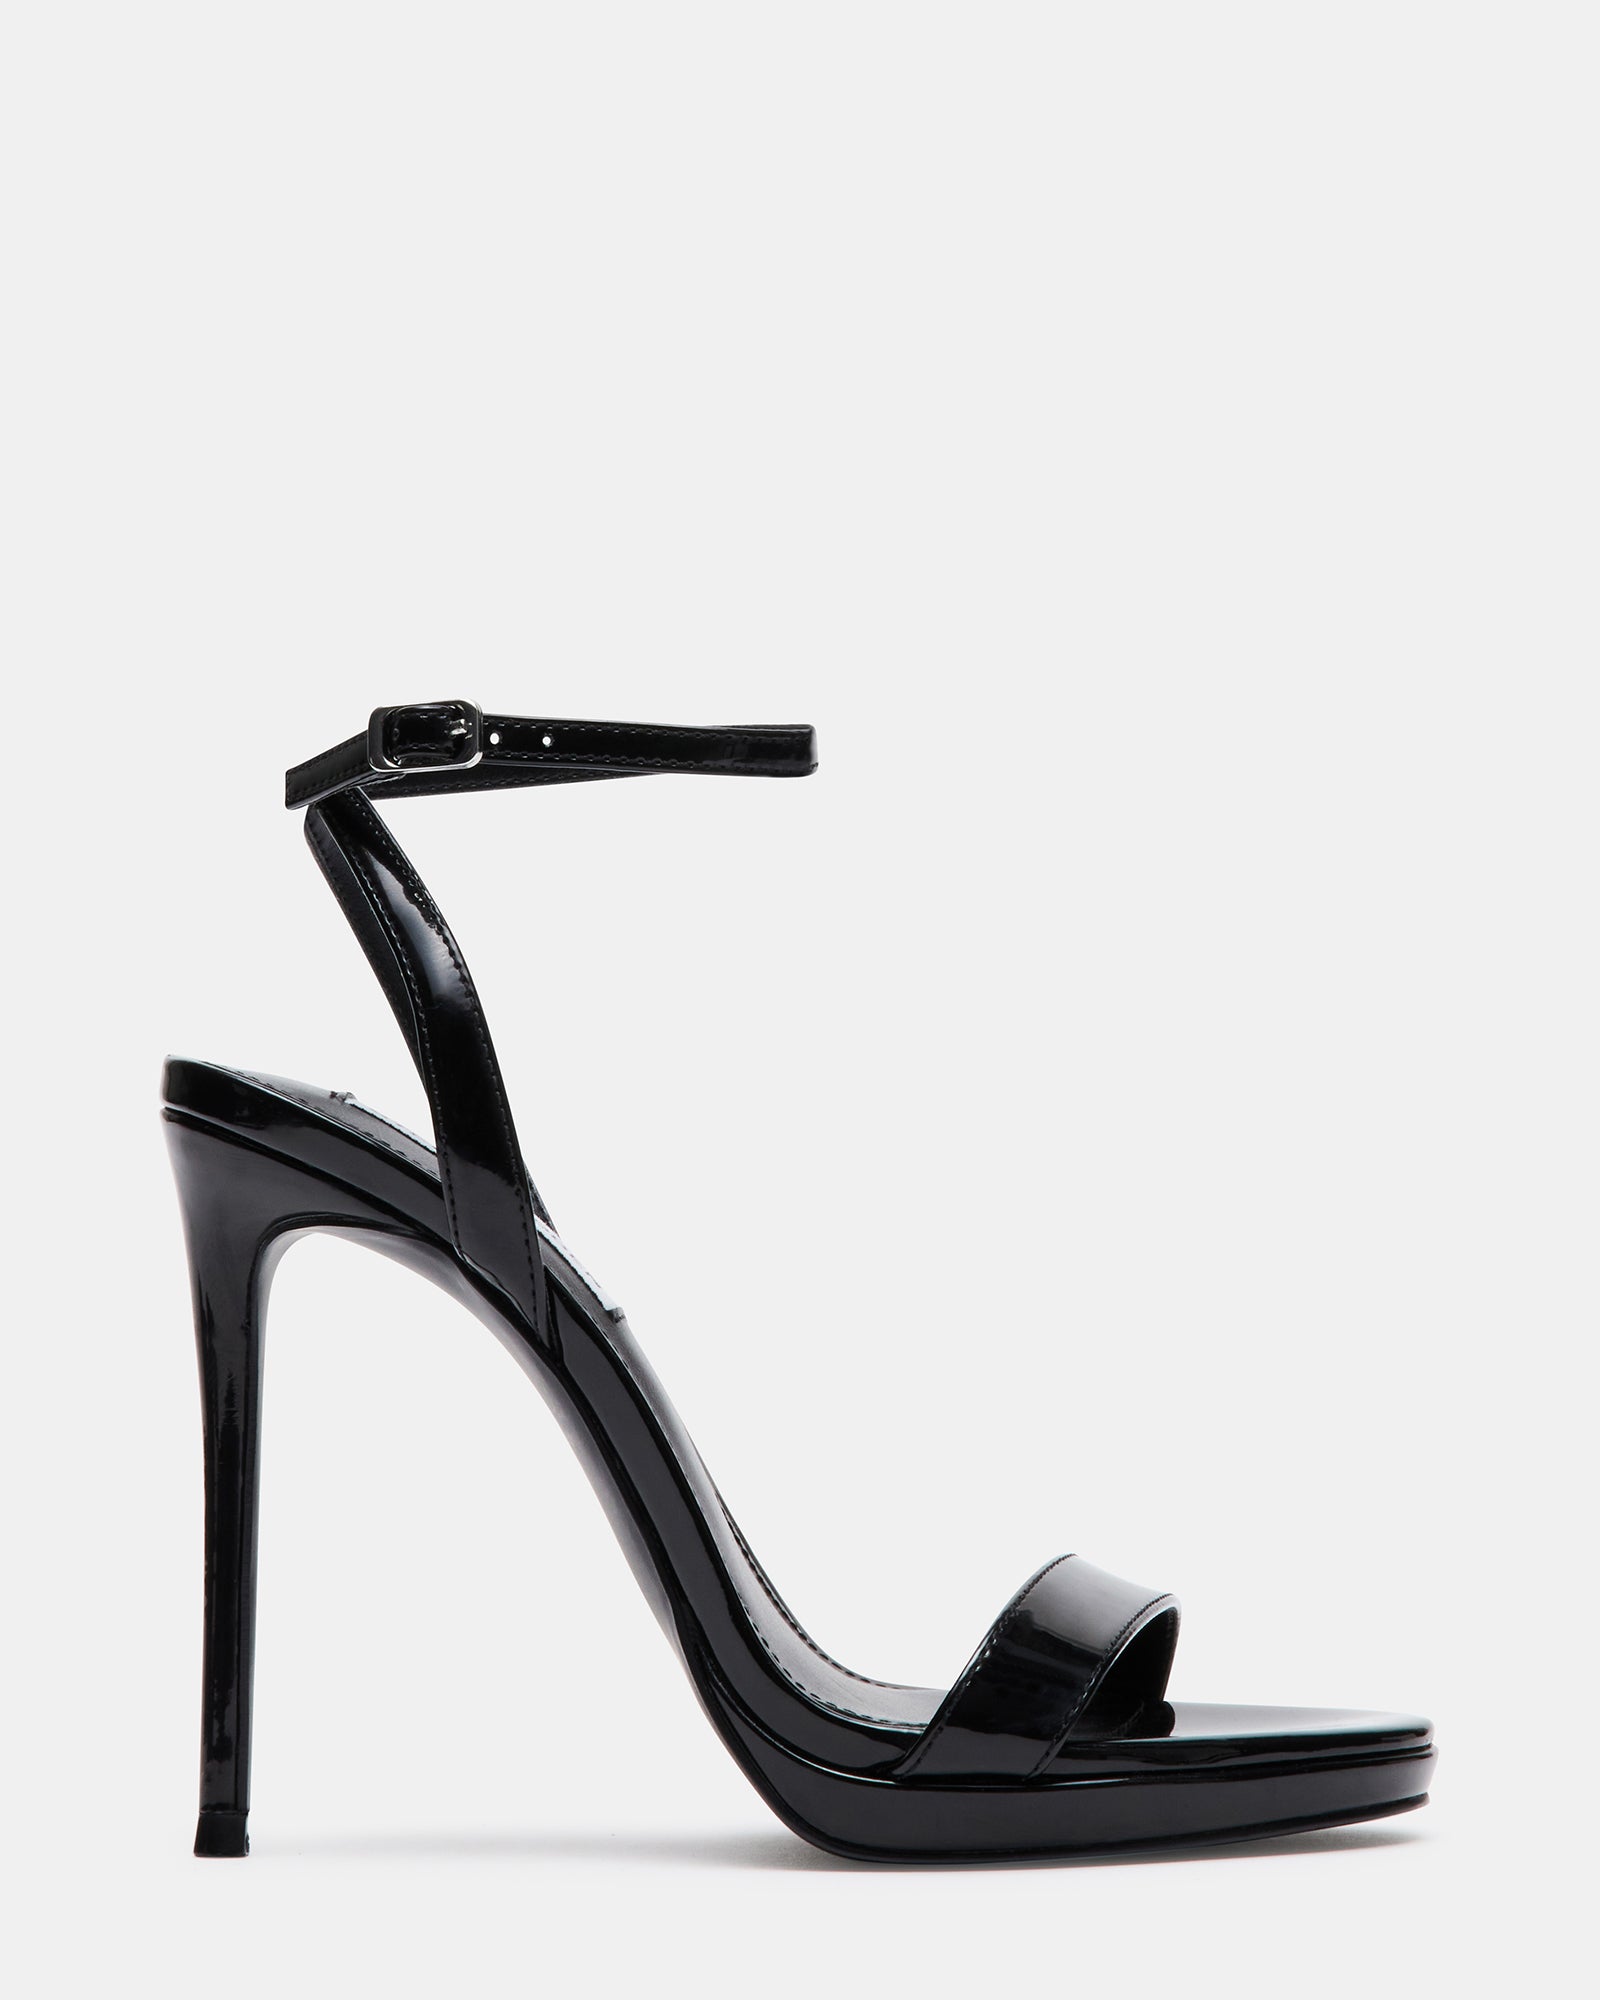 Black Patent Pointed-Toe Ankle-Strap Pumps - CHARLES & KEITH US